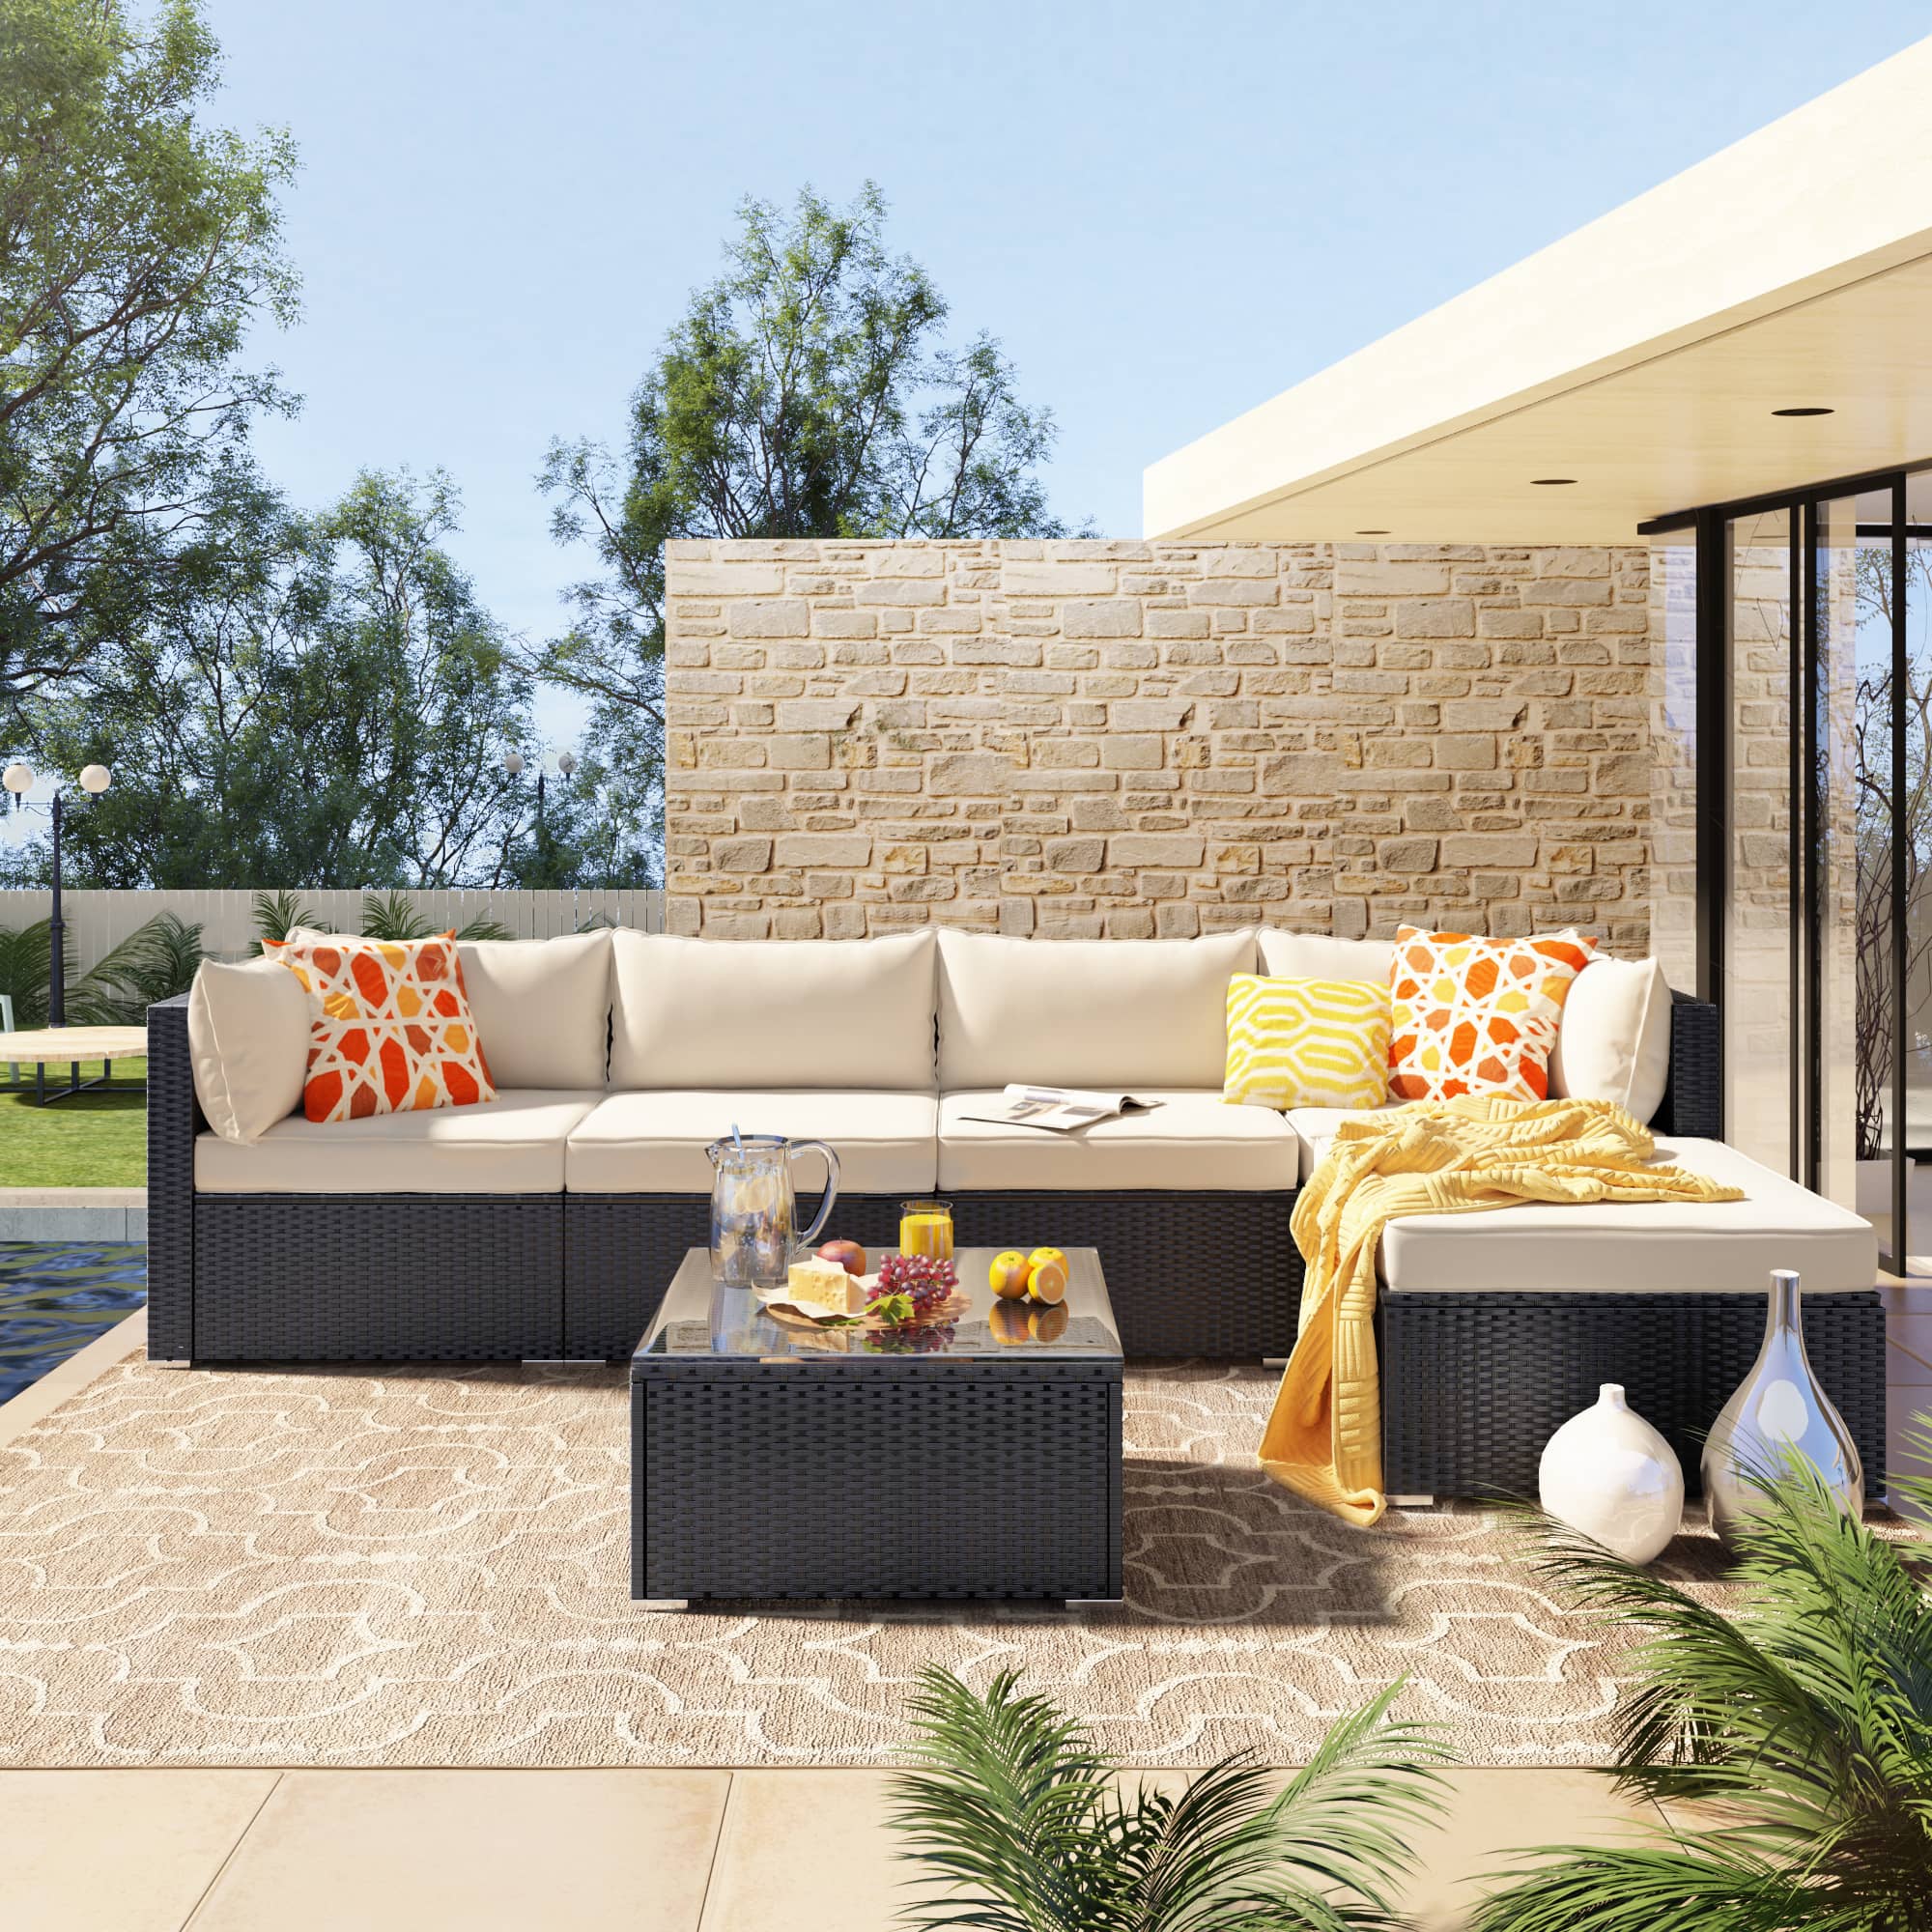 Casainc 6-Piece Patio PE Rattan Wicker Furniture Corner Sofa Set With Thick Removable Cushions And Sectional Sofa Chair